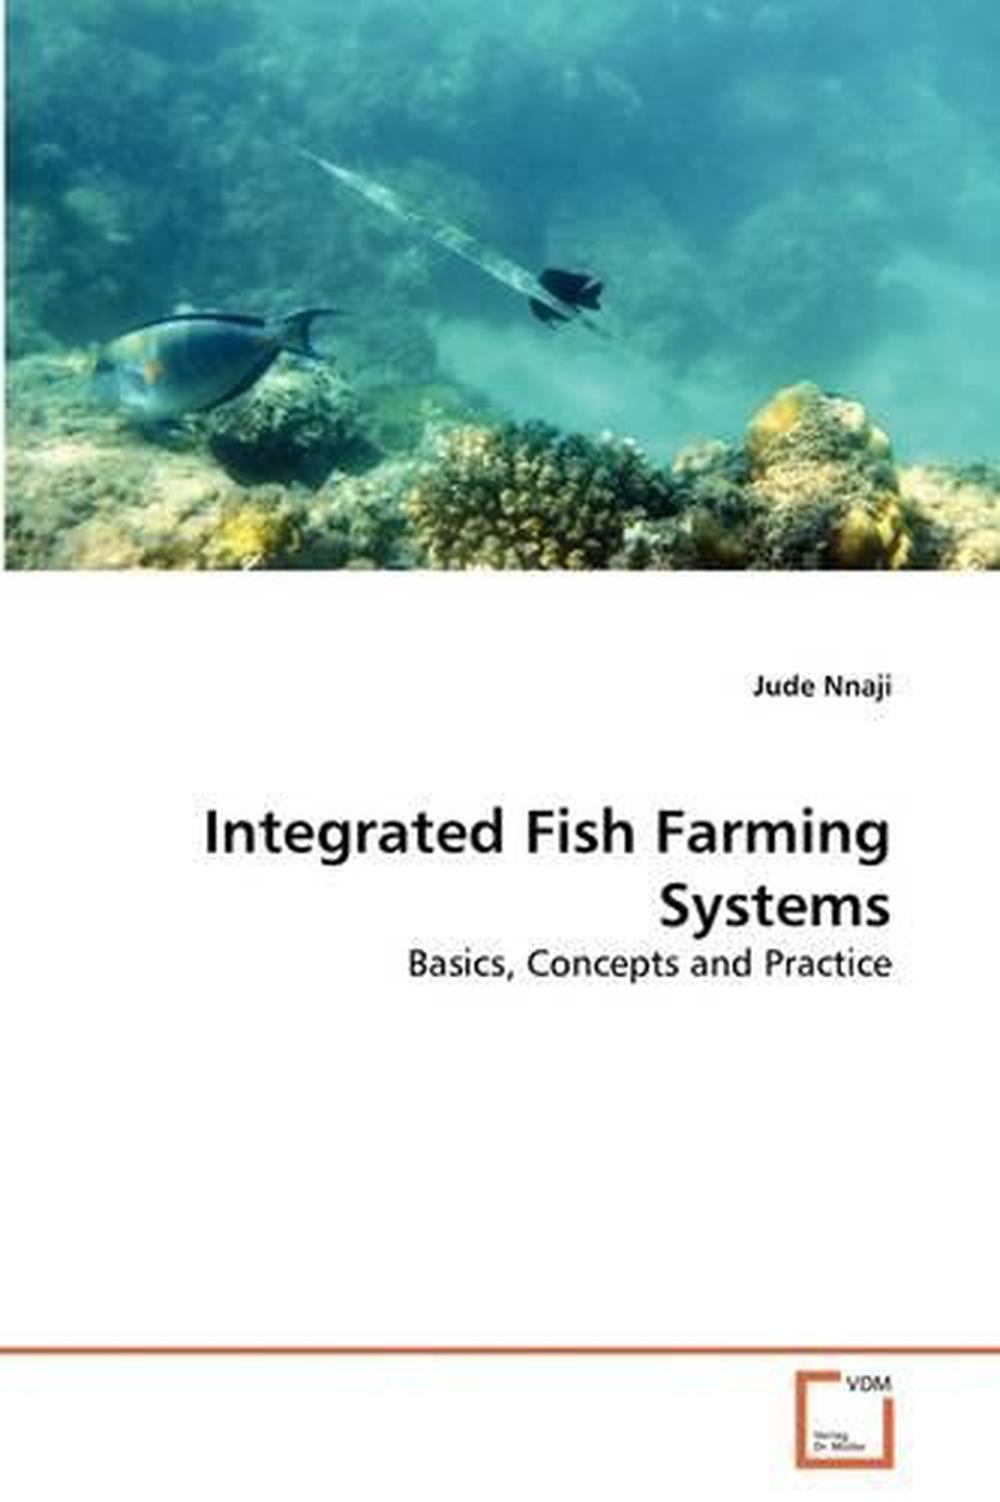 literature review on integrated fish farming